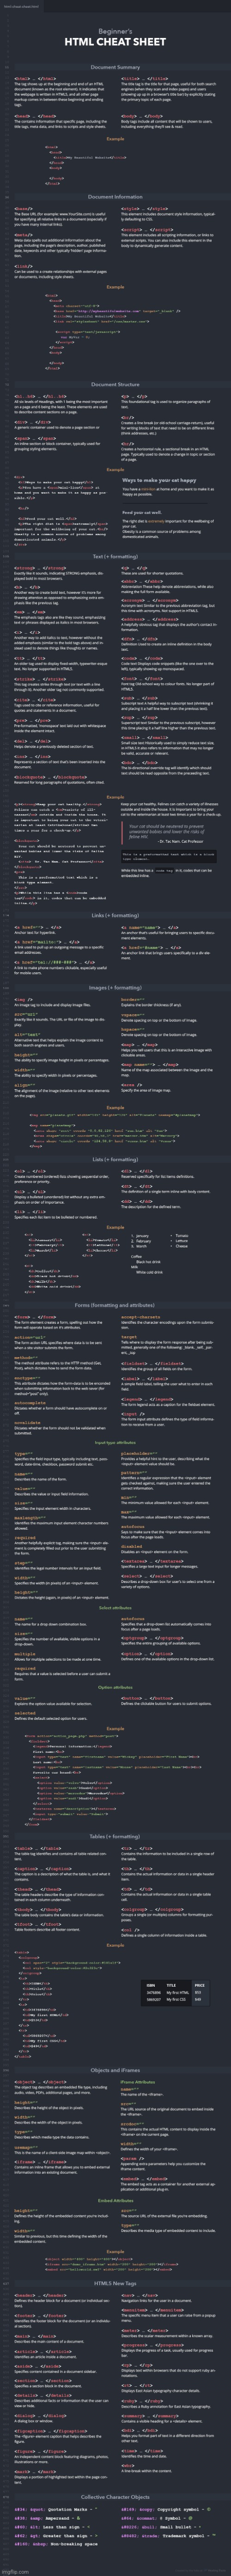 Beginner's HTML Cheat-Sheet (found by SimoTheFinlandized / Paul P. - 2022 CE) | image tagged in simothefinlandized,html,cheat sheet,infographic,computer-programming | made w/ Imgflip meme maker